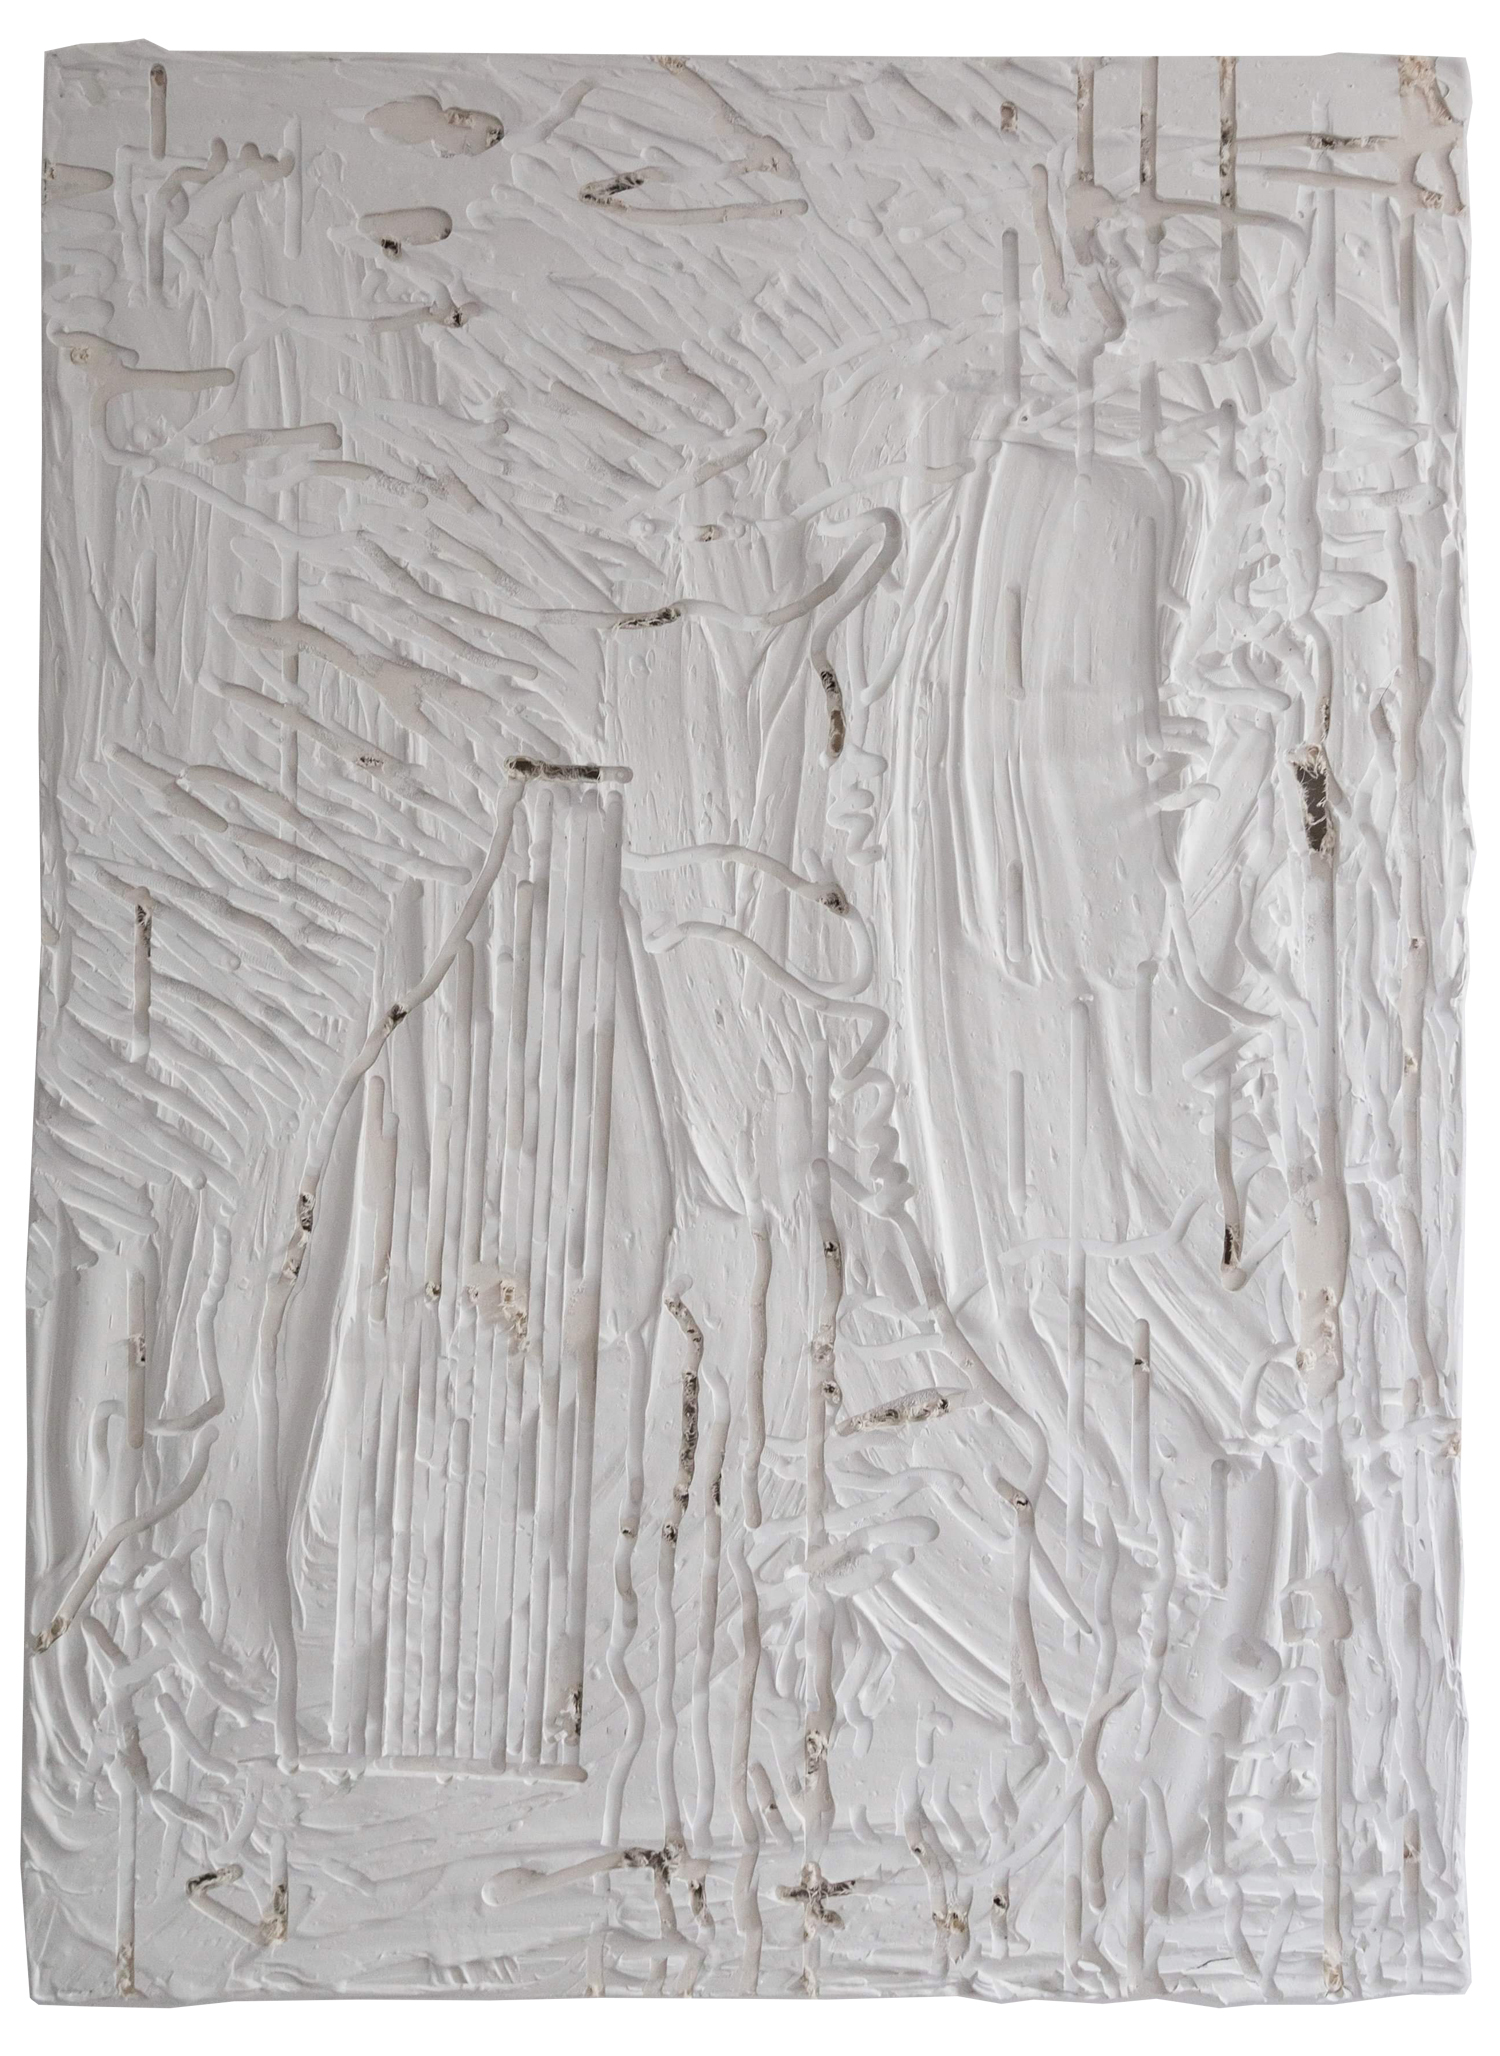 Collective Untitled (2),plaster and resin on canvas, 150x120 cm, 2021